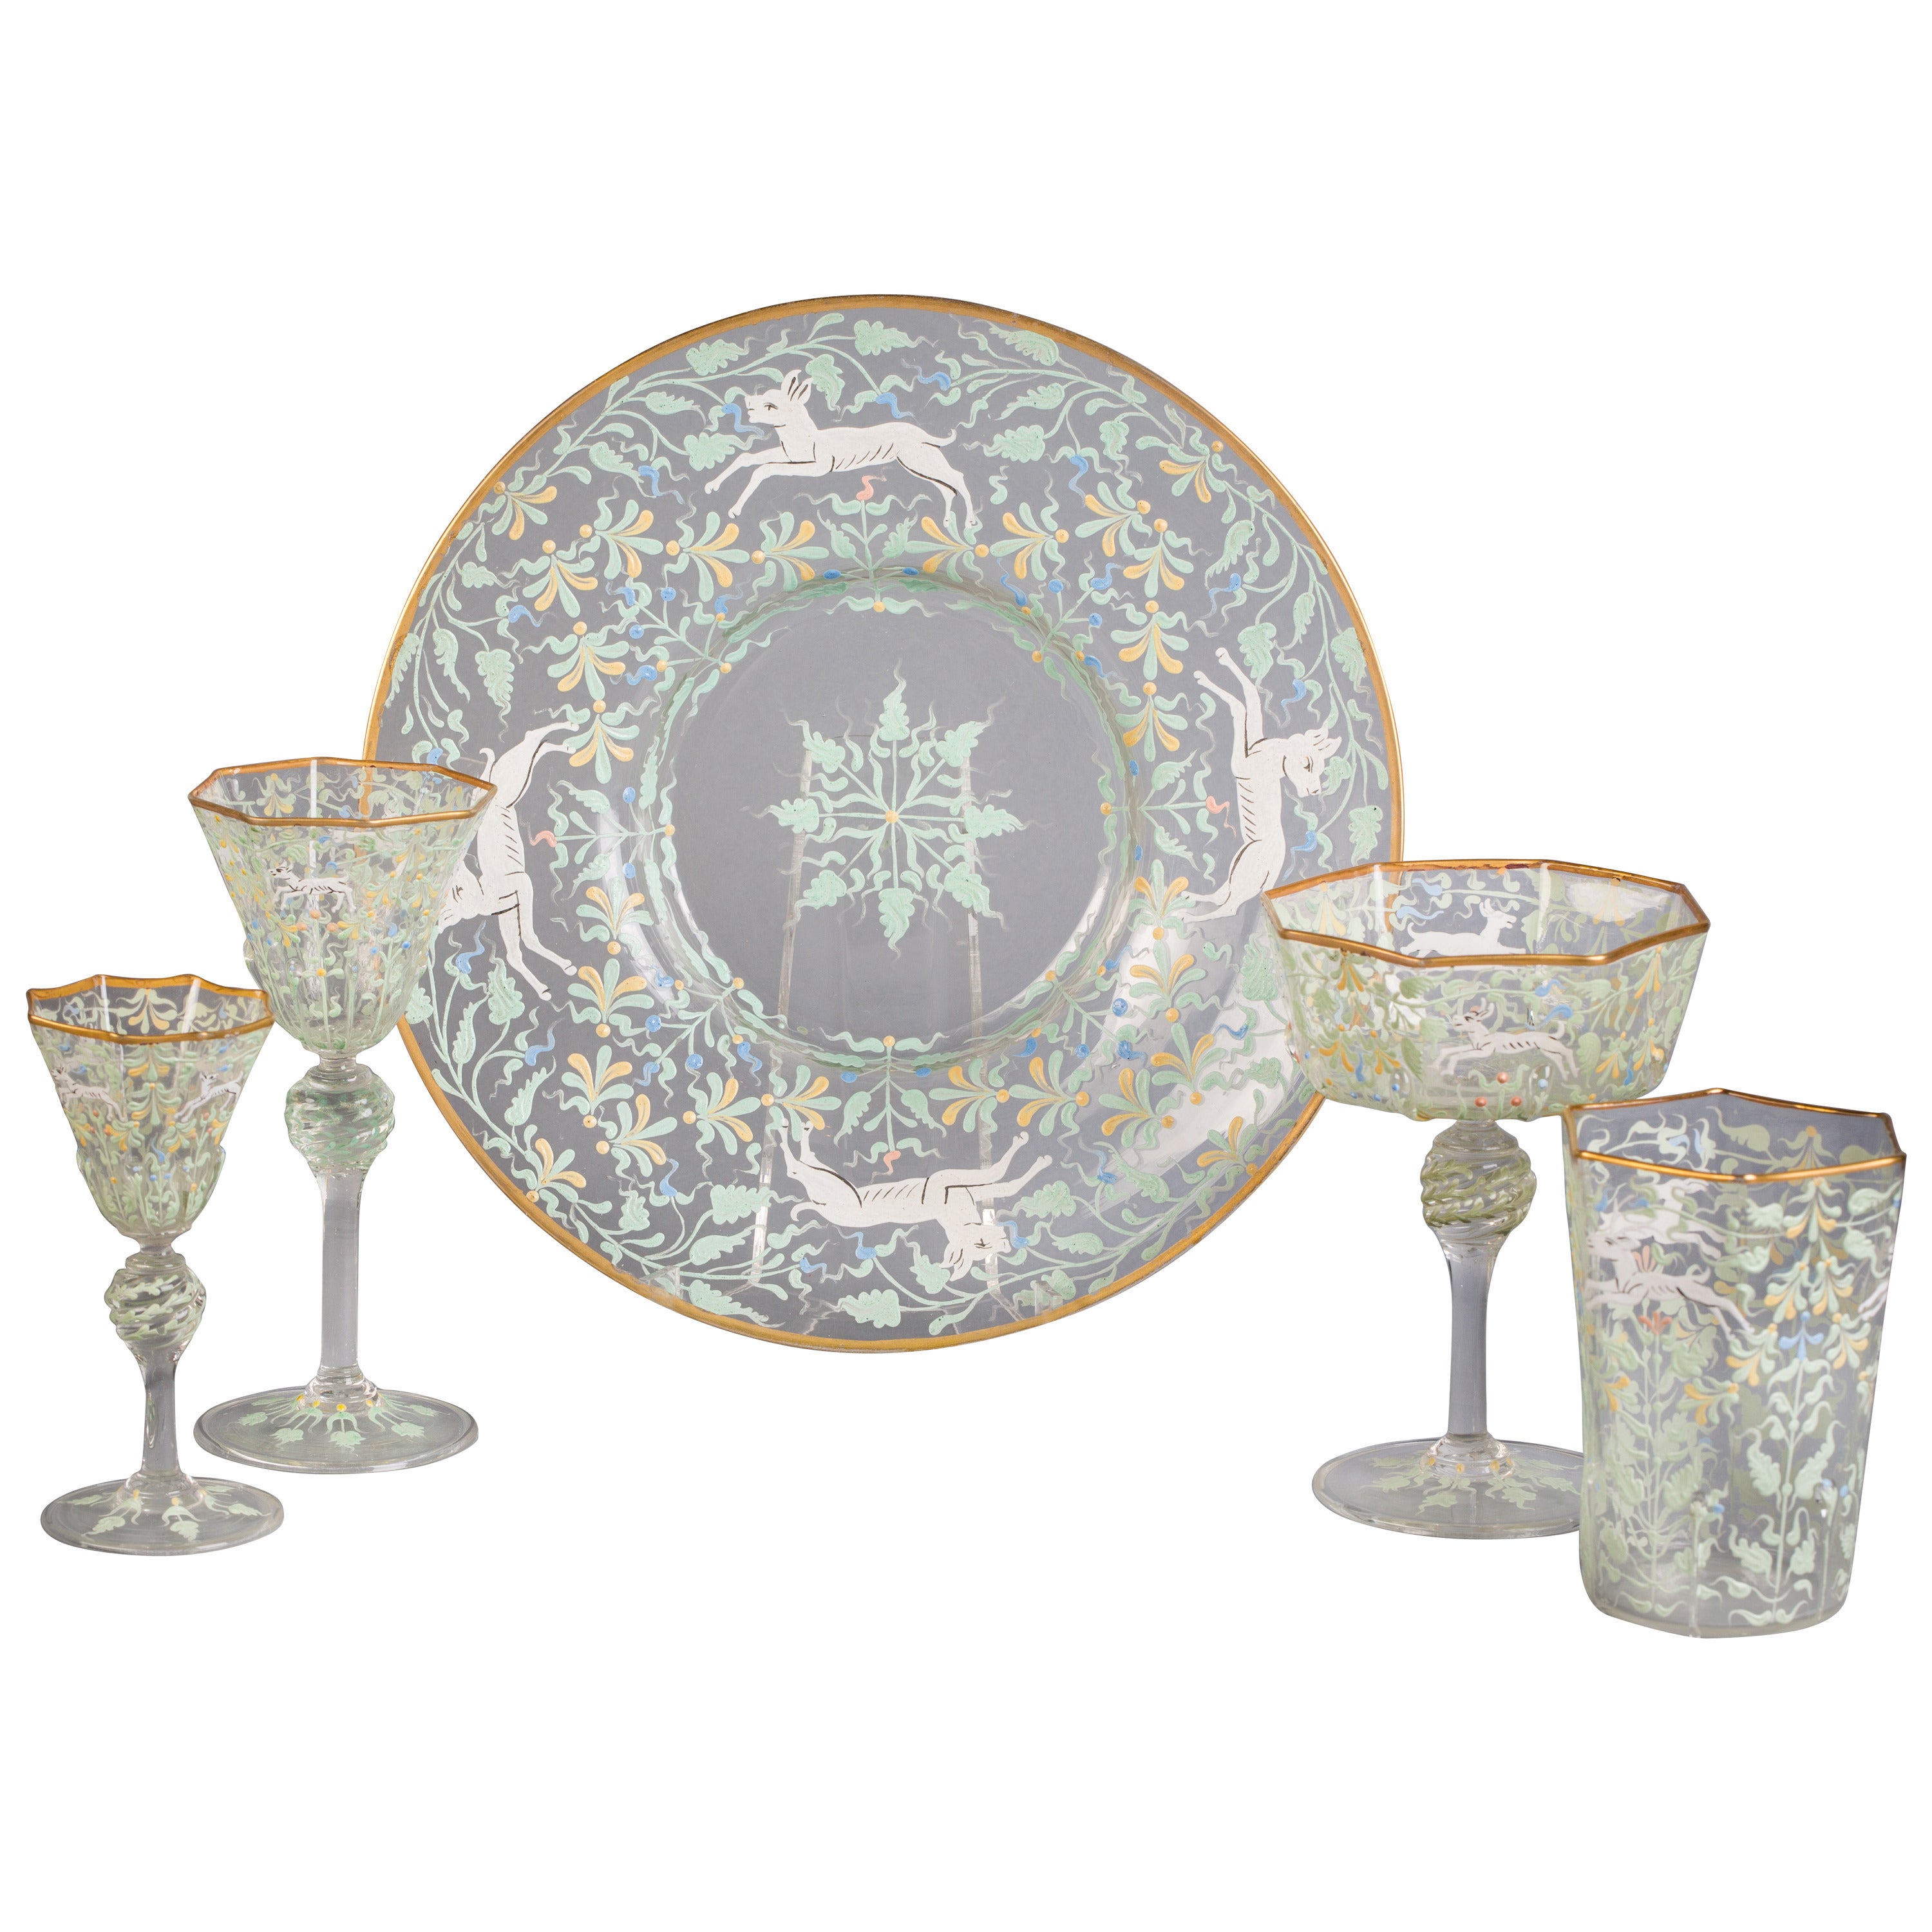 Enamel Glass Table Service, Early 20th Century